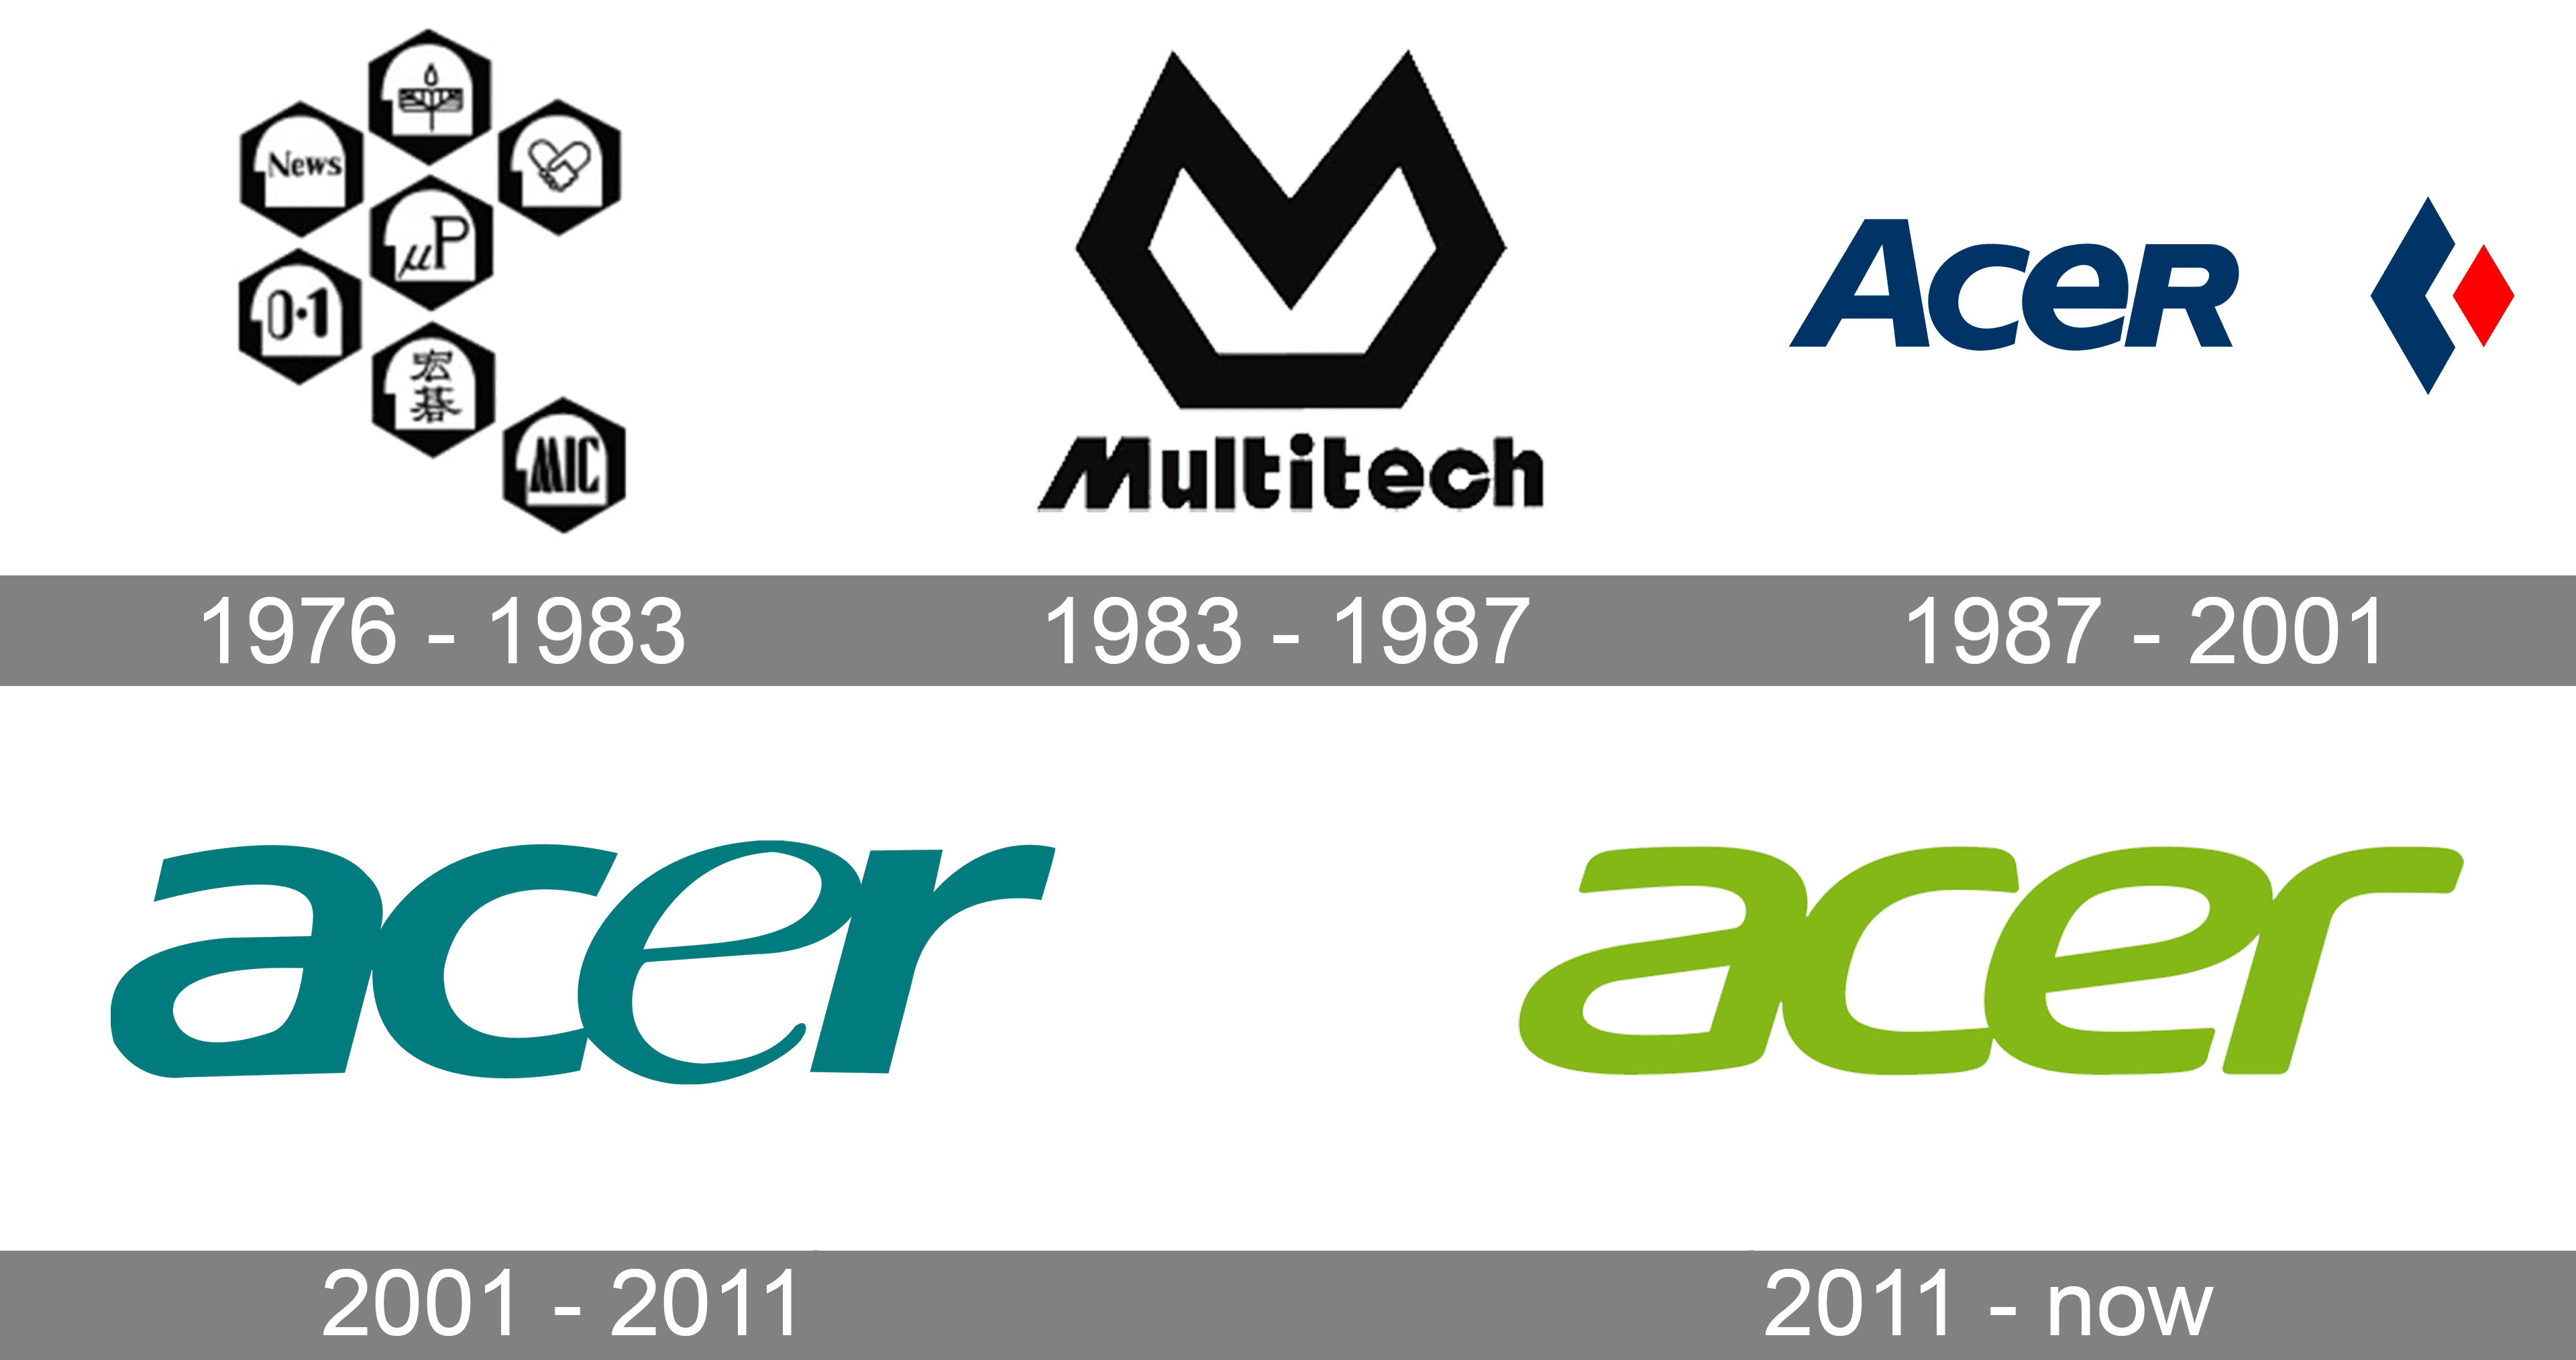 Image of Acer logo-DY111692-Picxy